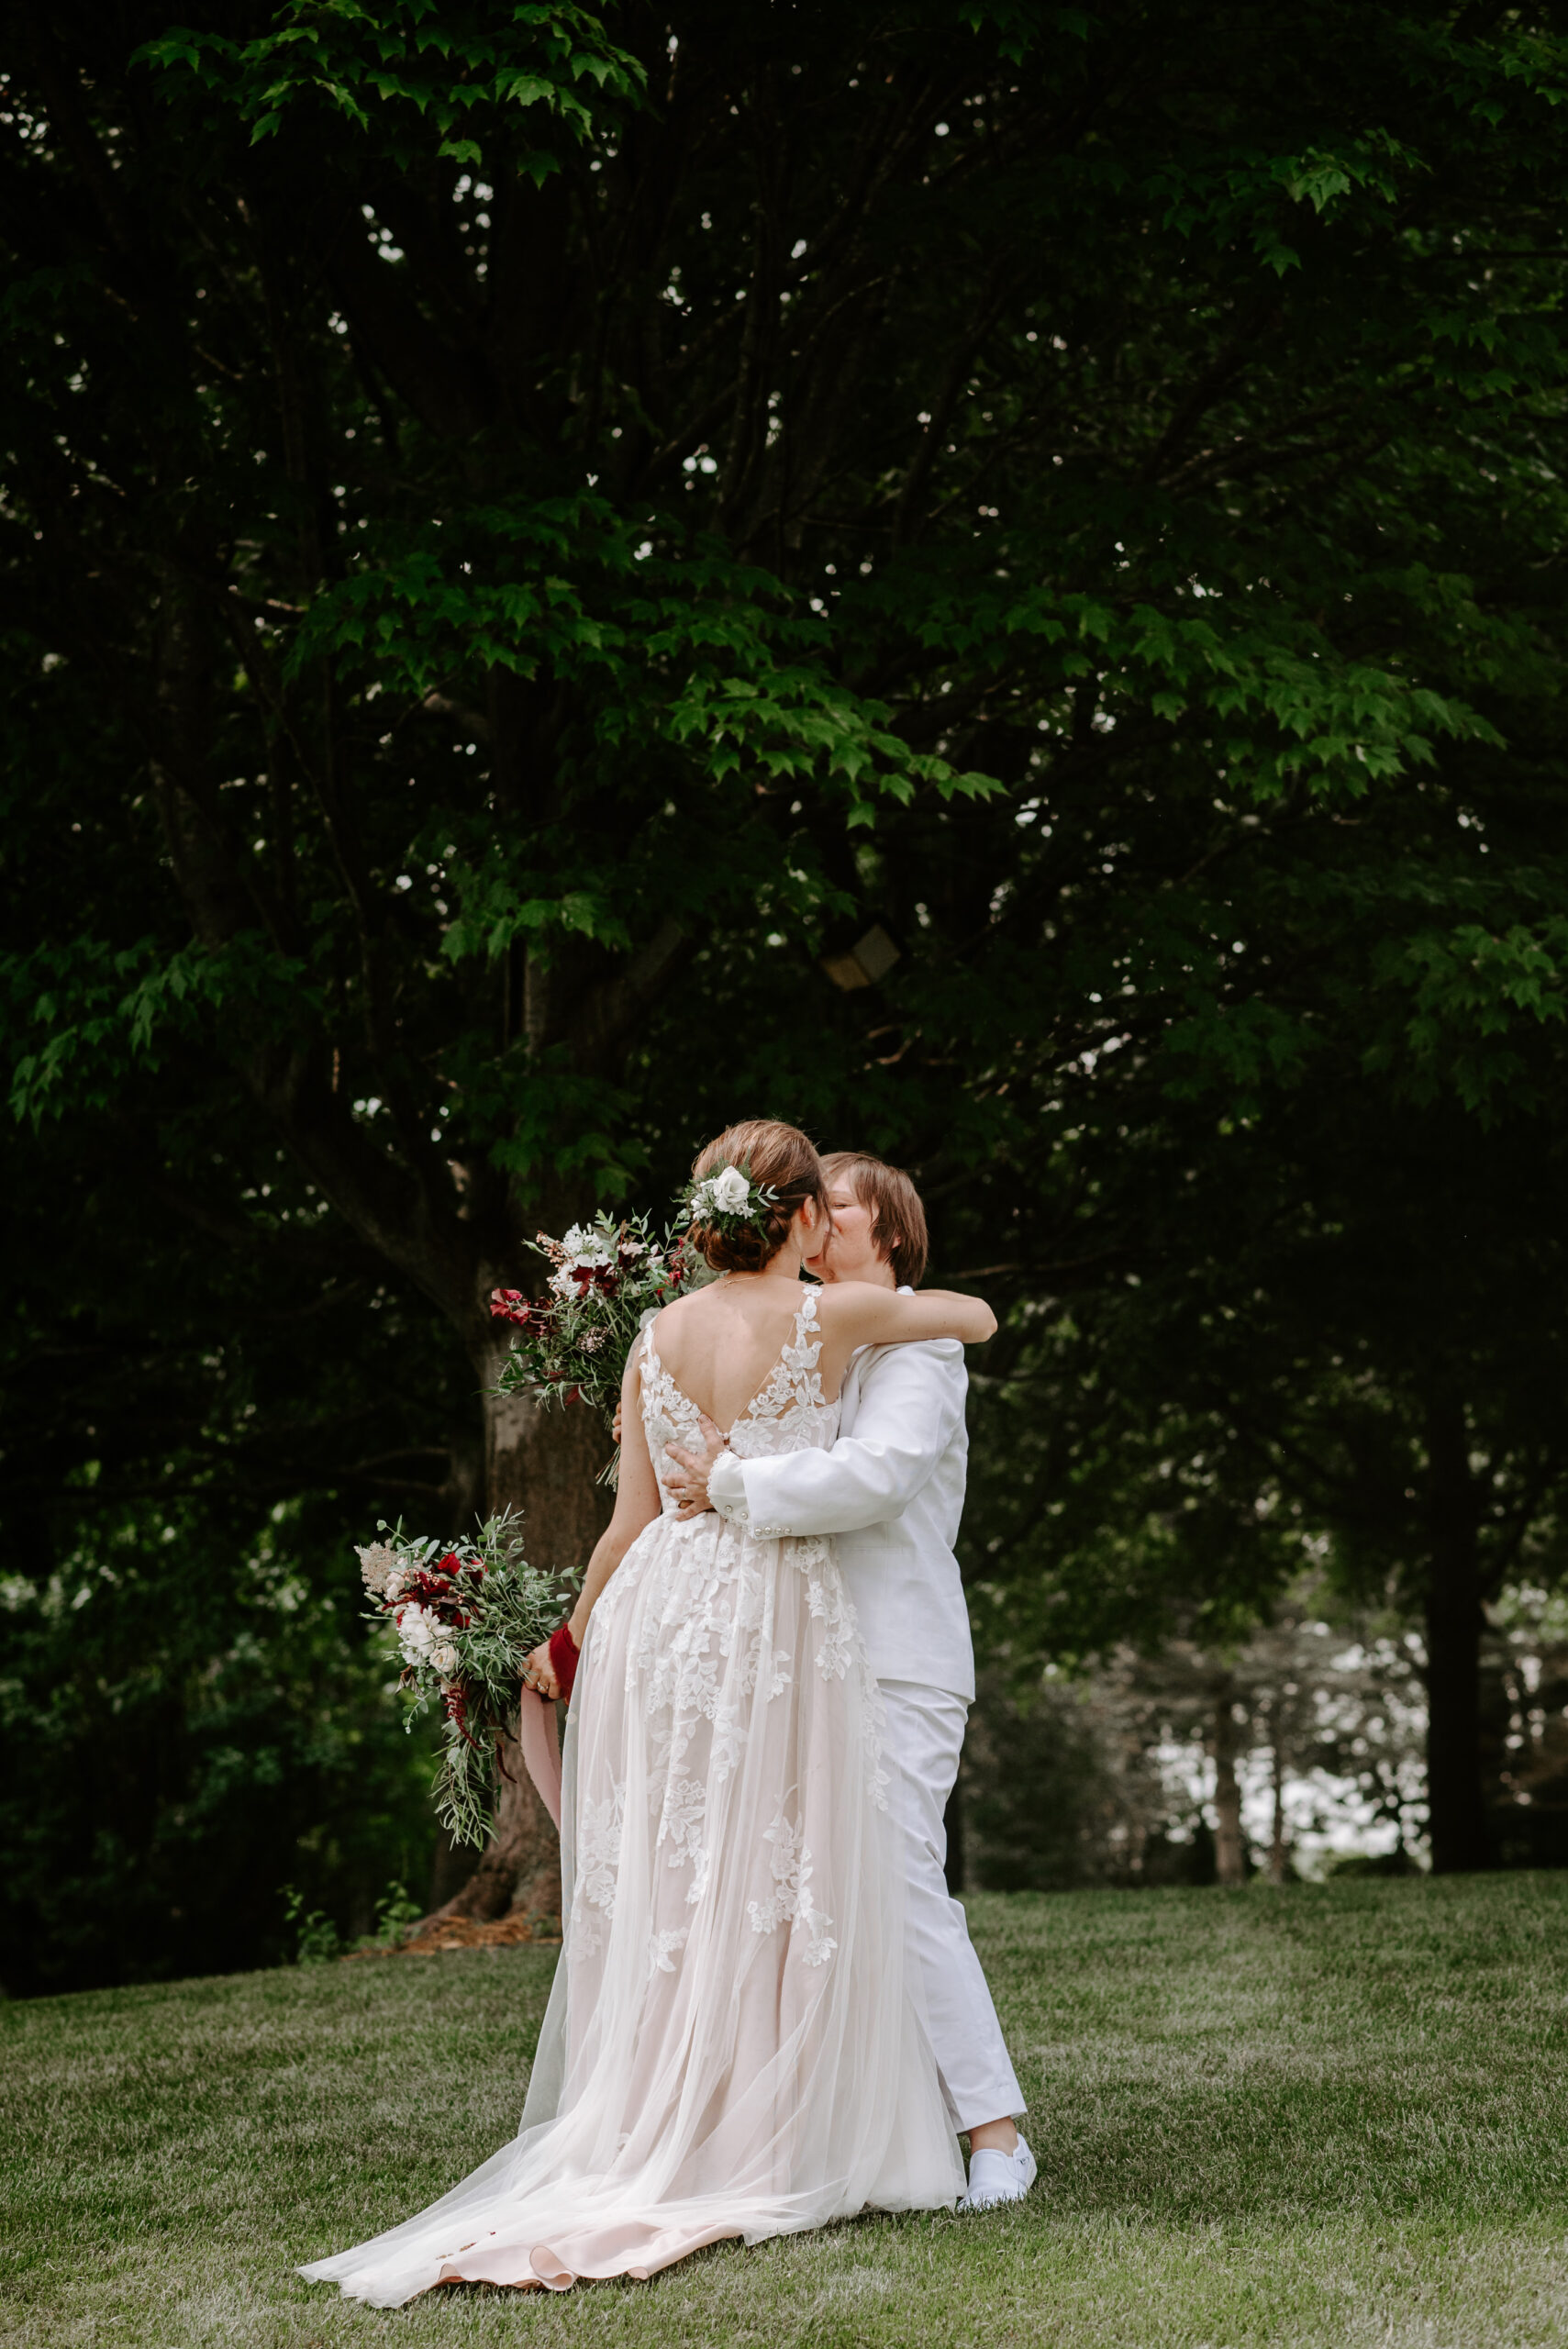 Two brides embracing after their wedding ceremony both wearing white one wearing J.Crew suit one wearing white floral down both holding wedding florals to brides kissing backyard we're winning photographed by Michigan queer wedding photographer lLiv Lyszyk photography based in Grand Rapids